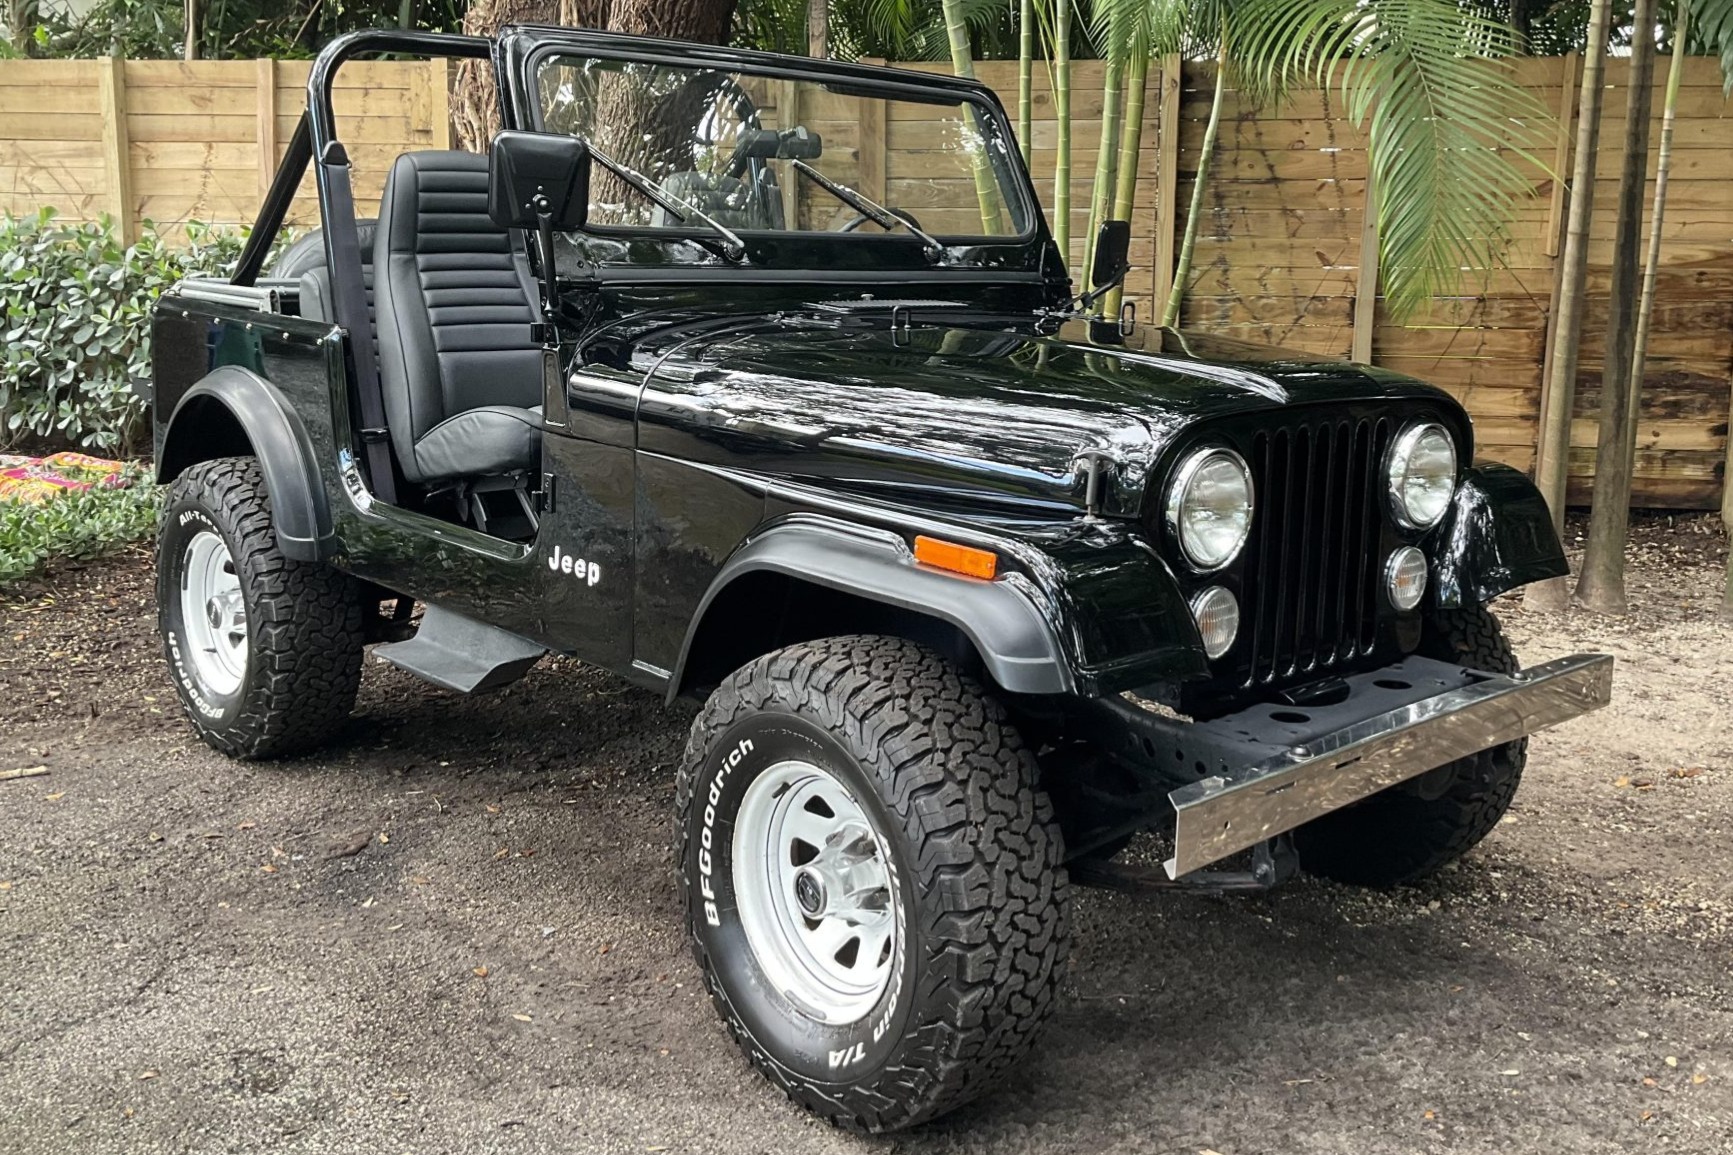 Used 1986 Jeep CJ-7 4-Speed Review